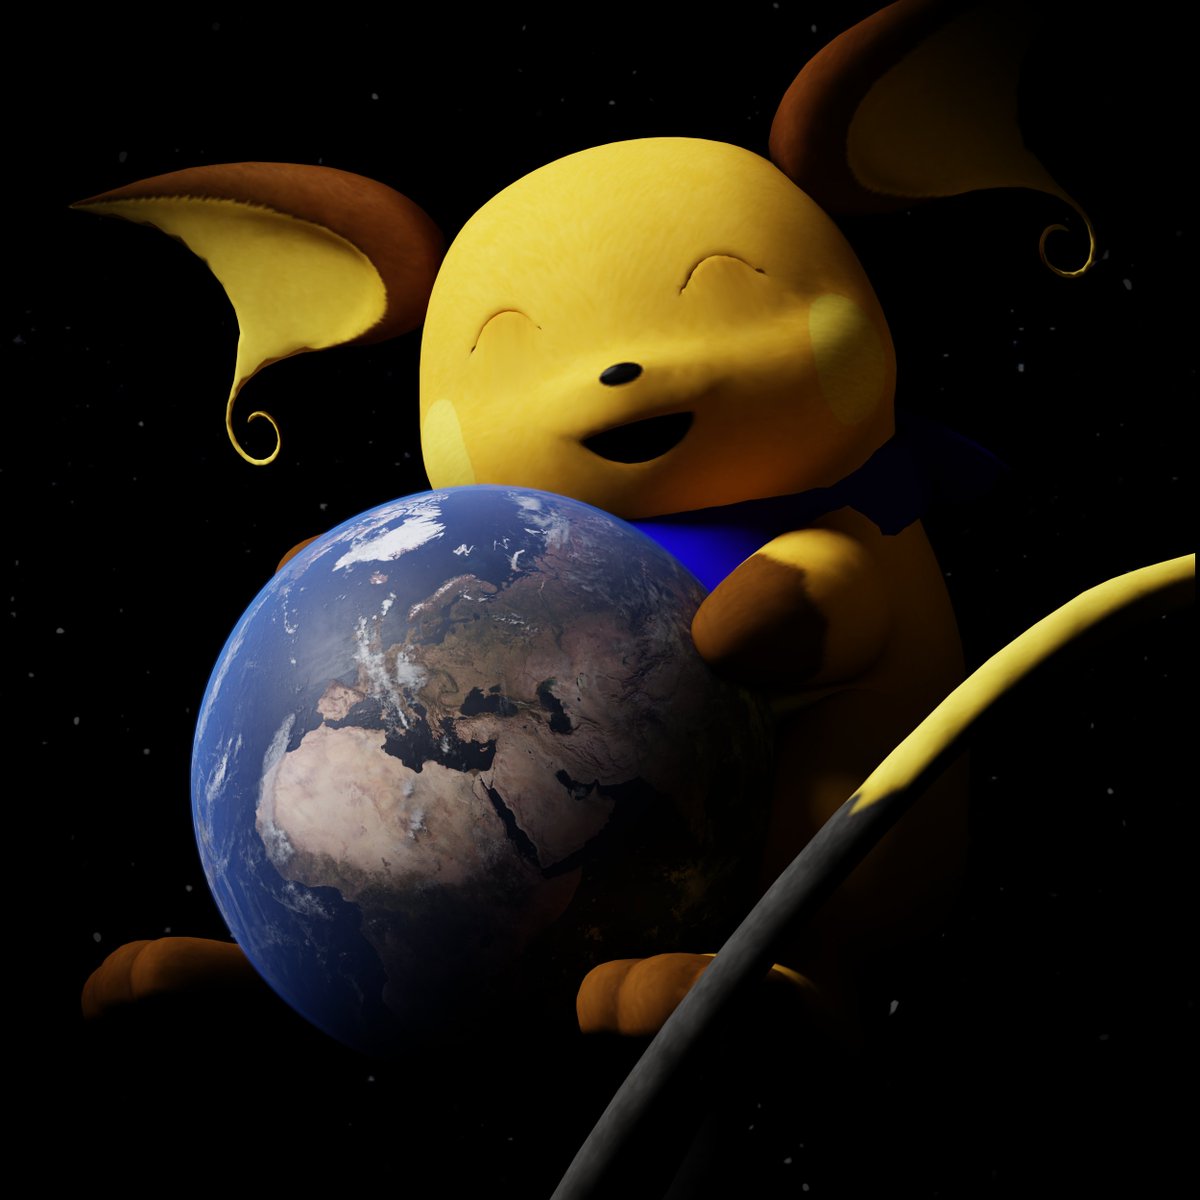 #EarthDay2024 
Happy Earth 2024 belatedly, Galchu! : 3
- April 22, 2024 -

#ChuHolidays
Special Holidays in the Year presented by Raichu~

#ThankChuForGoodFriends 
Many warm-hearted “Chu's” (Thank chu's = Thanks) and Hugs to good Friends~ Gift by @ViolettheVulpix Thank chu~ x3c